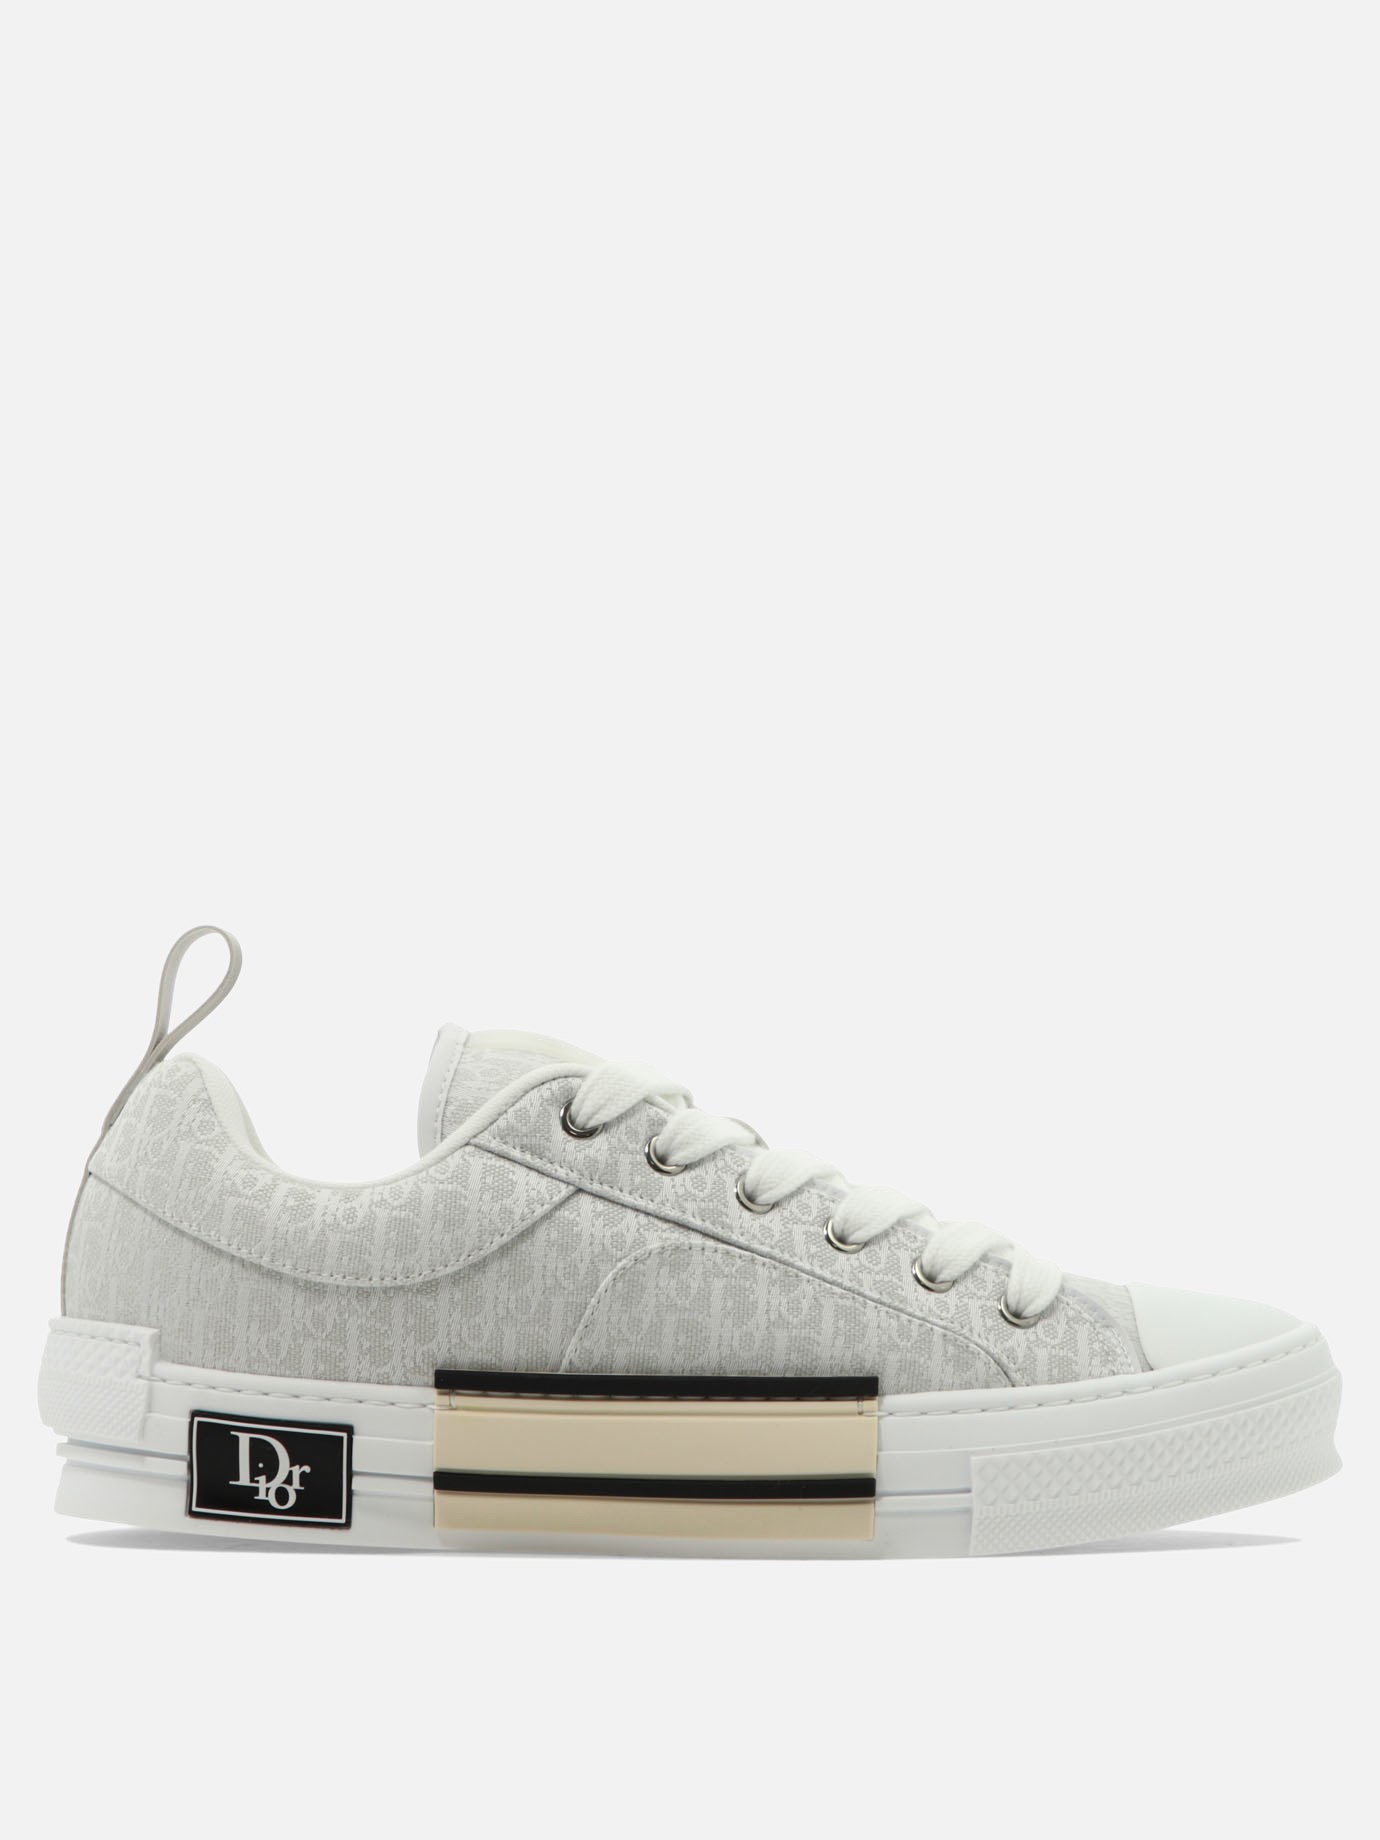 Sneaker  B23  by Dior